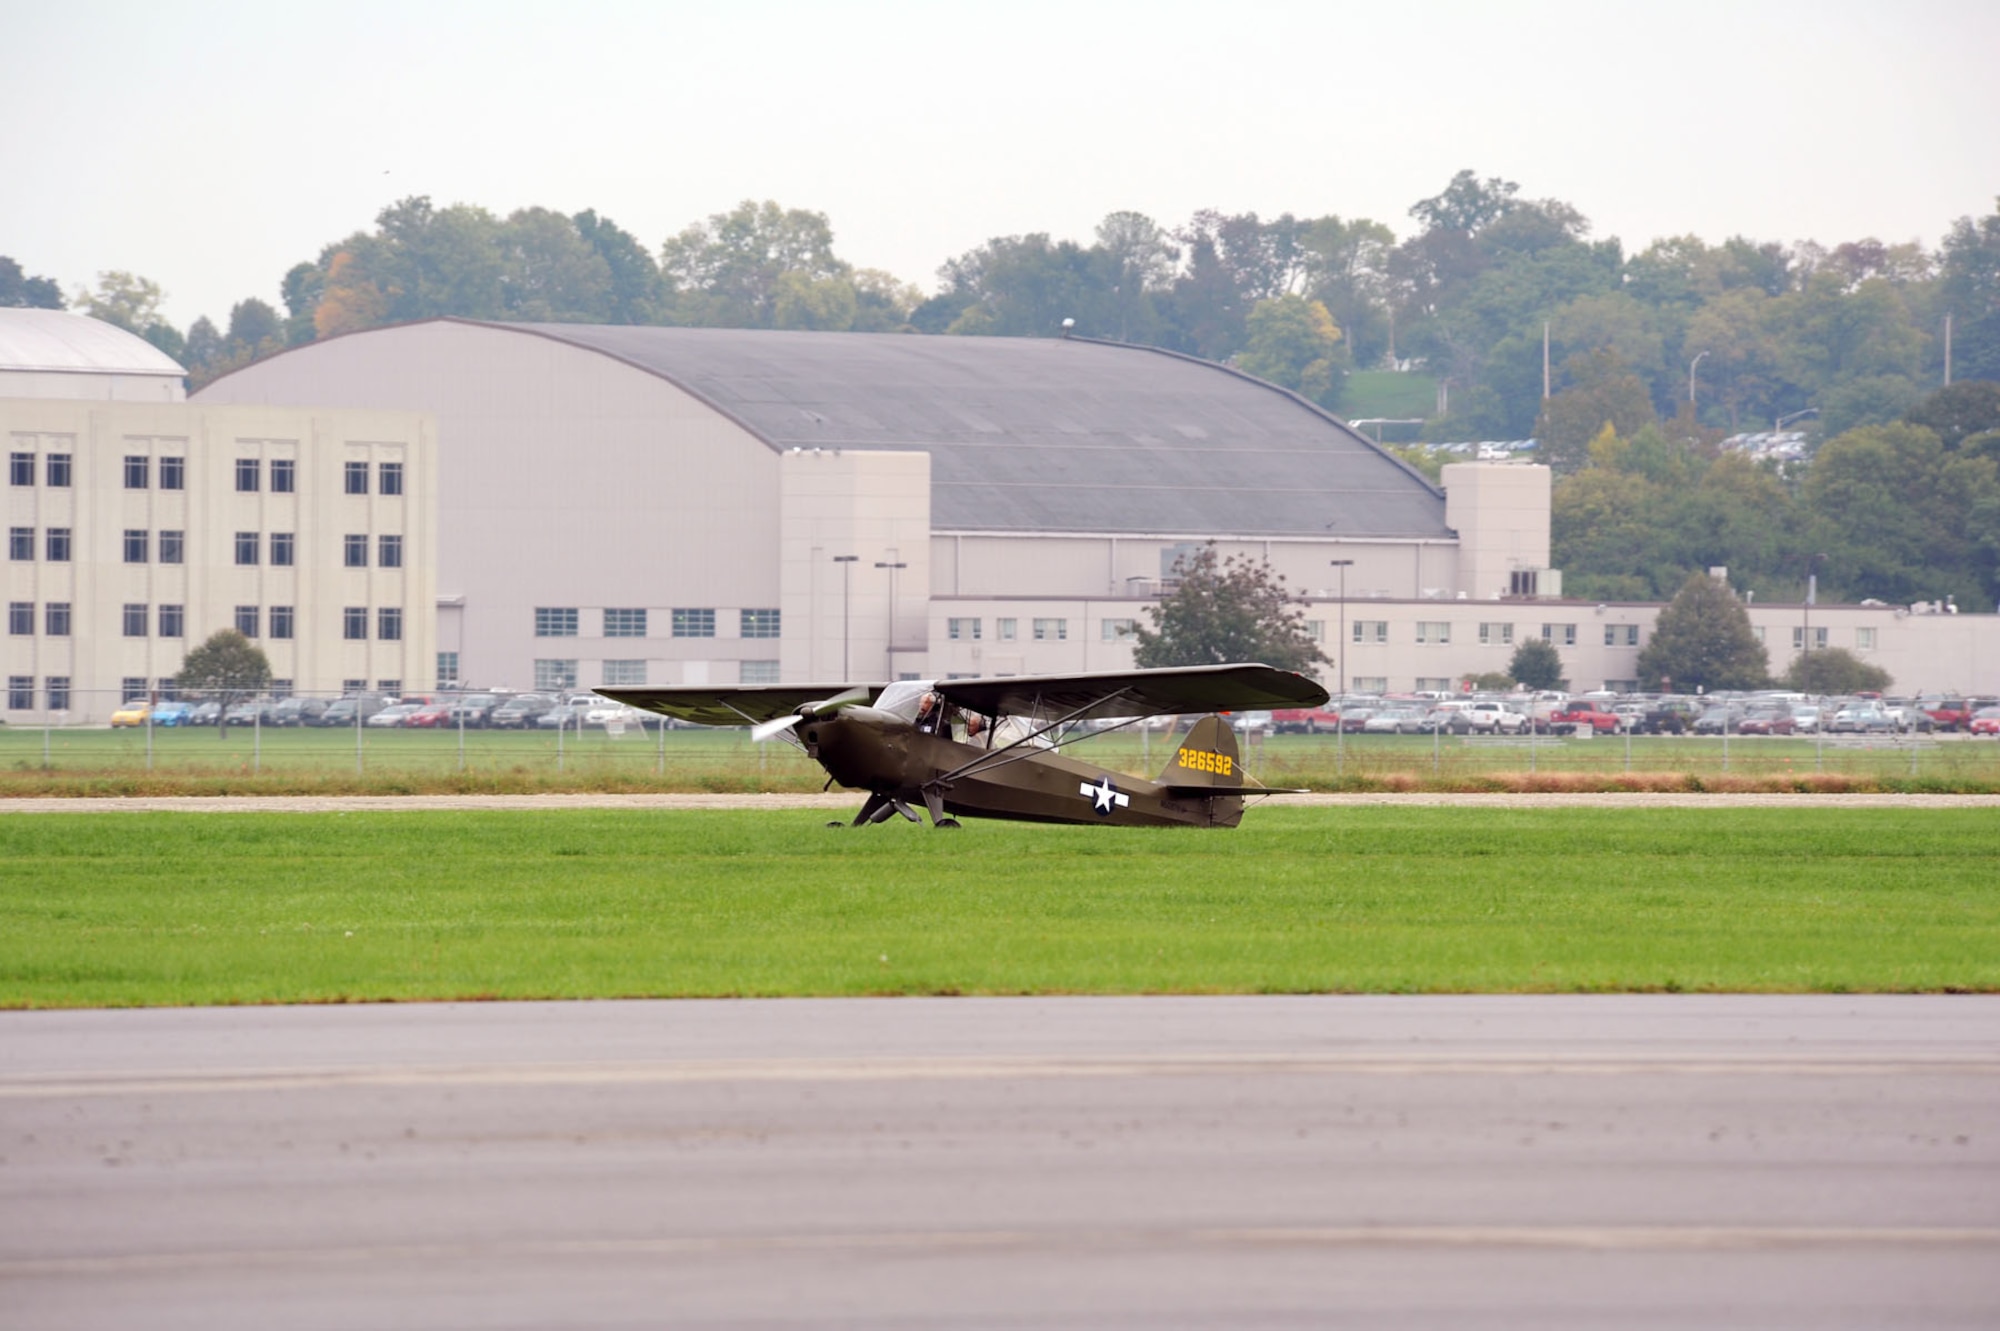 DAYTON, Ohio -- An L-2M that was used at the U.S. Army Air Forces Liaison Pilot Training School during World War II was flown to the National Museum of the U.S. Air Force on Sept. 28, 2011. The pilot of the aircraft's final flight, Dick Valladao, completed the restoration of the aircraft to its original Army specifications and donated it to the museum. (U.S. Air Force photo by Jeff Fisher)